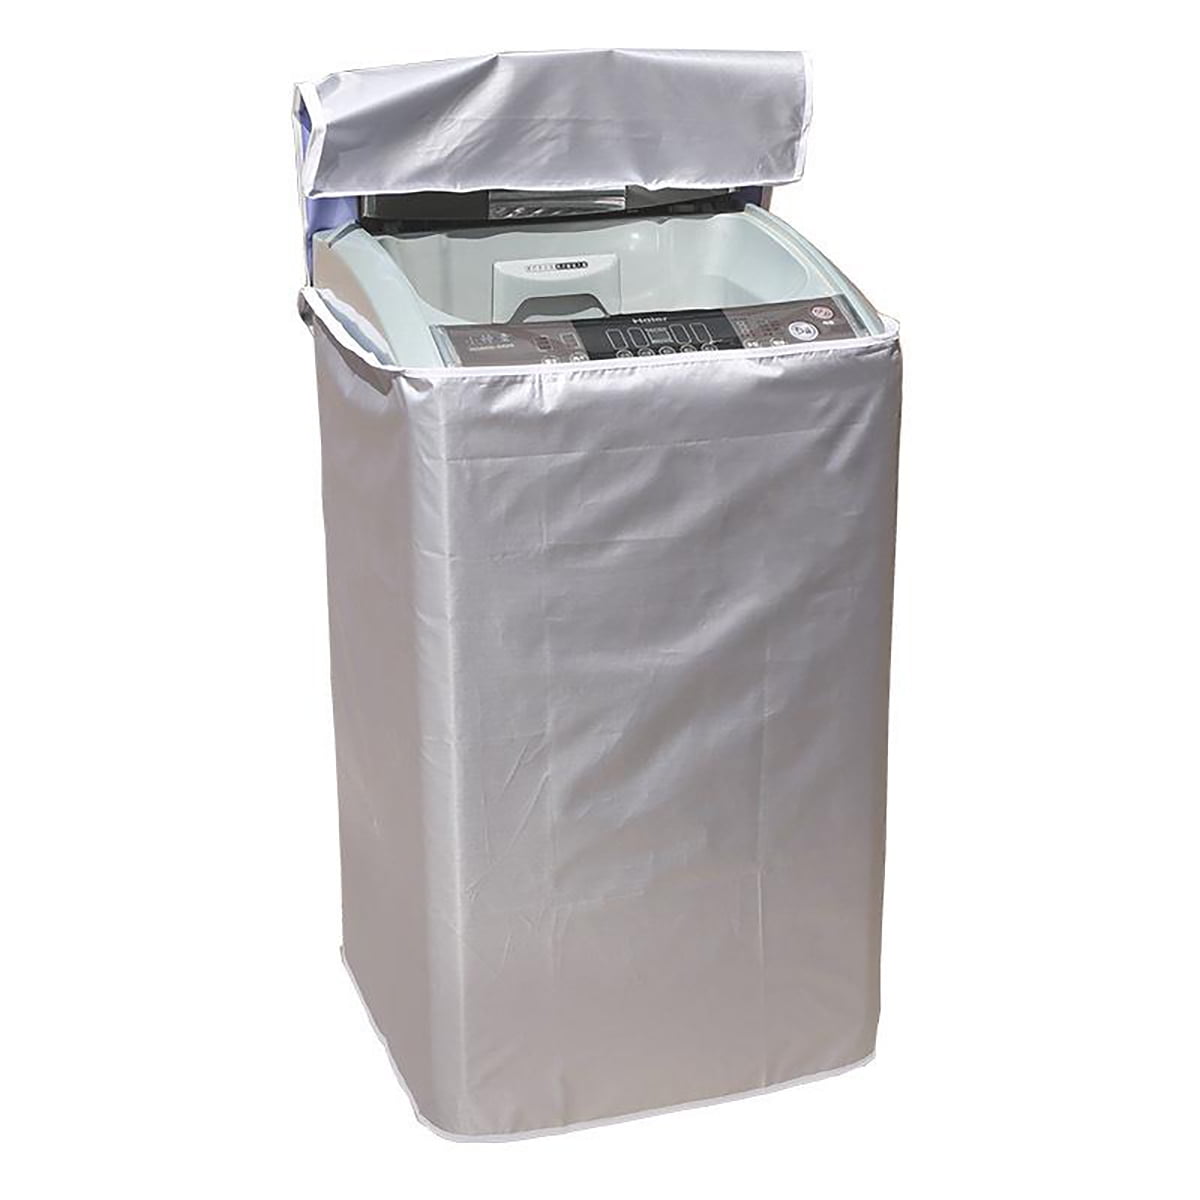 Washing Machine Cover Dustproof Waterproof Protect for Front Load Washer/Dryer 